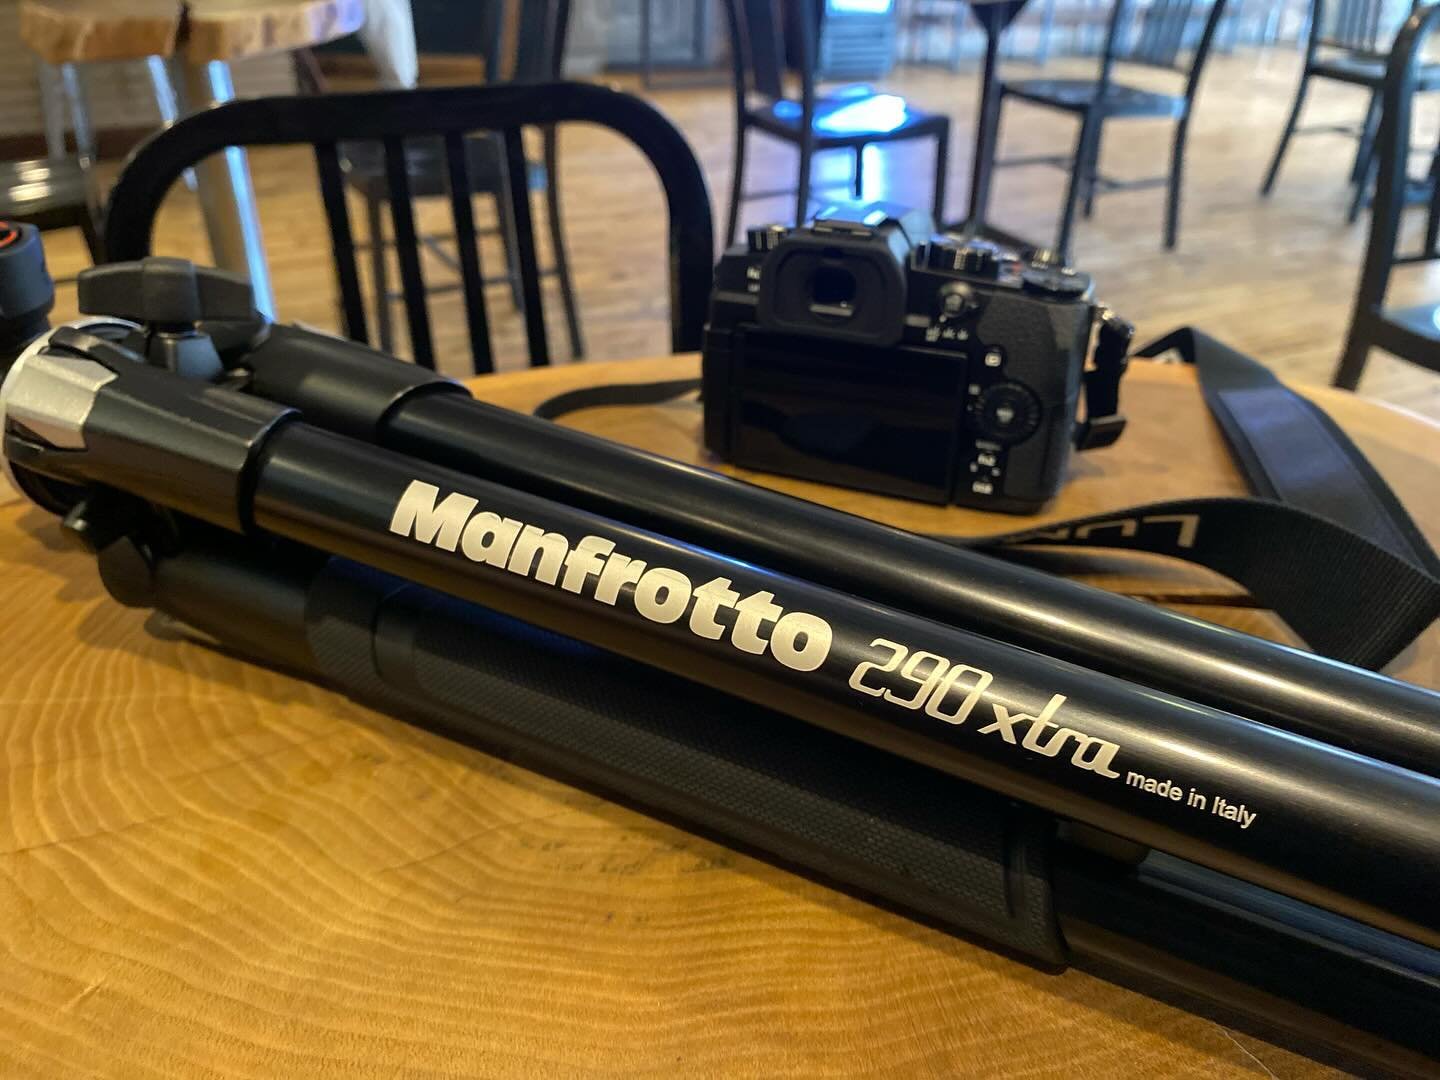 We just picked up a @manfrottoimaginemore tripod from @hoyersphotography to help provide a steady hand for our interview this afternoon with a new area business. Check back later to learn more! 🎥 I&rsquo;ll give you a clue 🐝